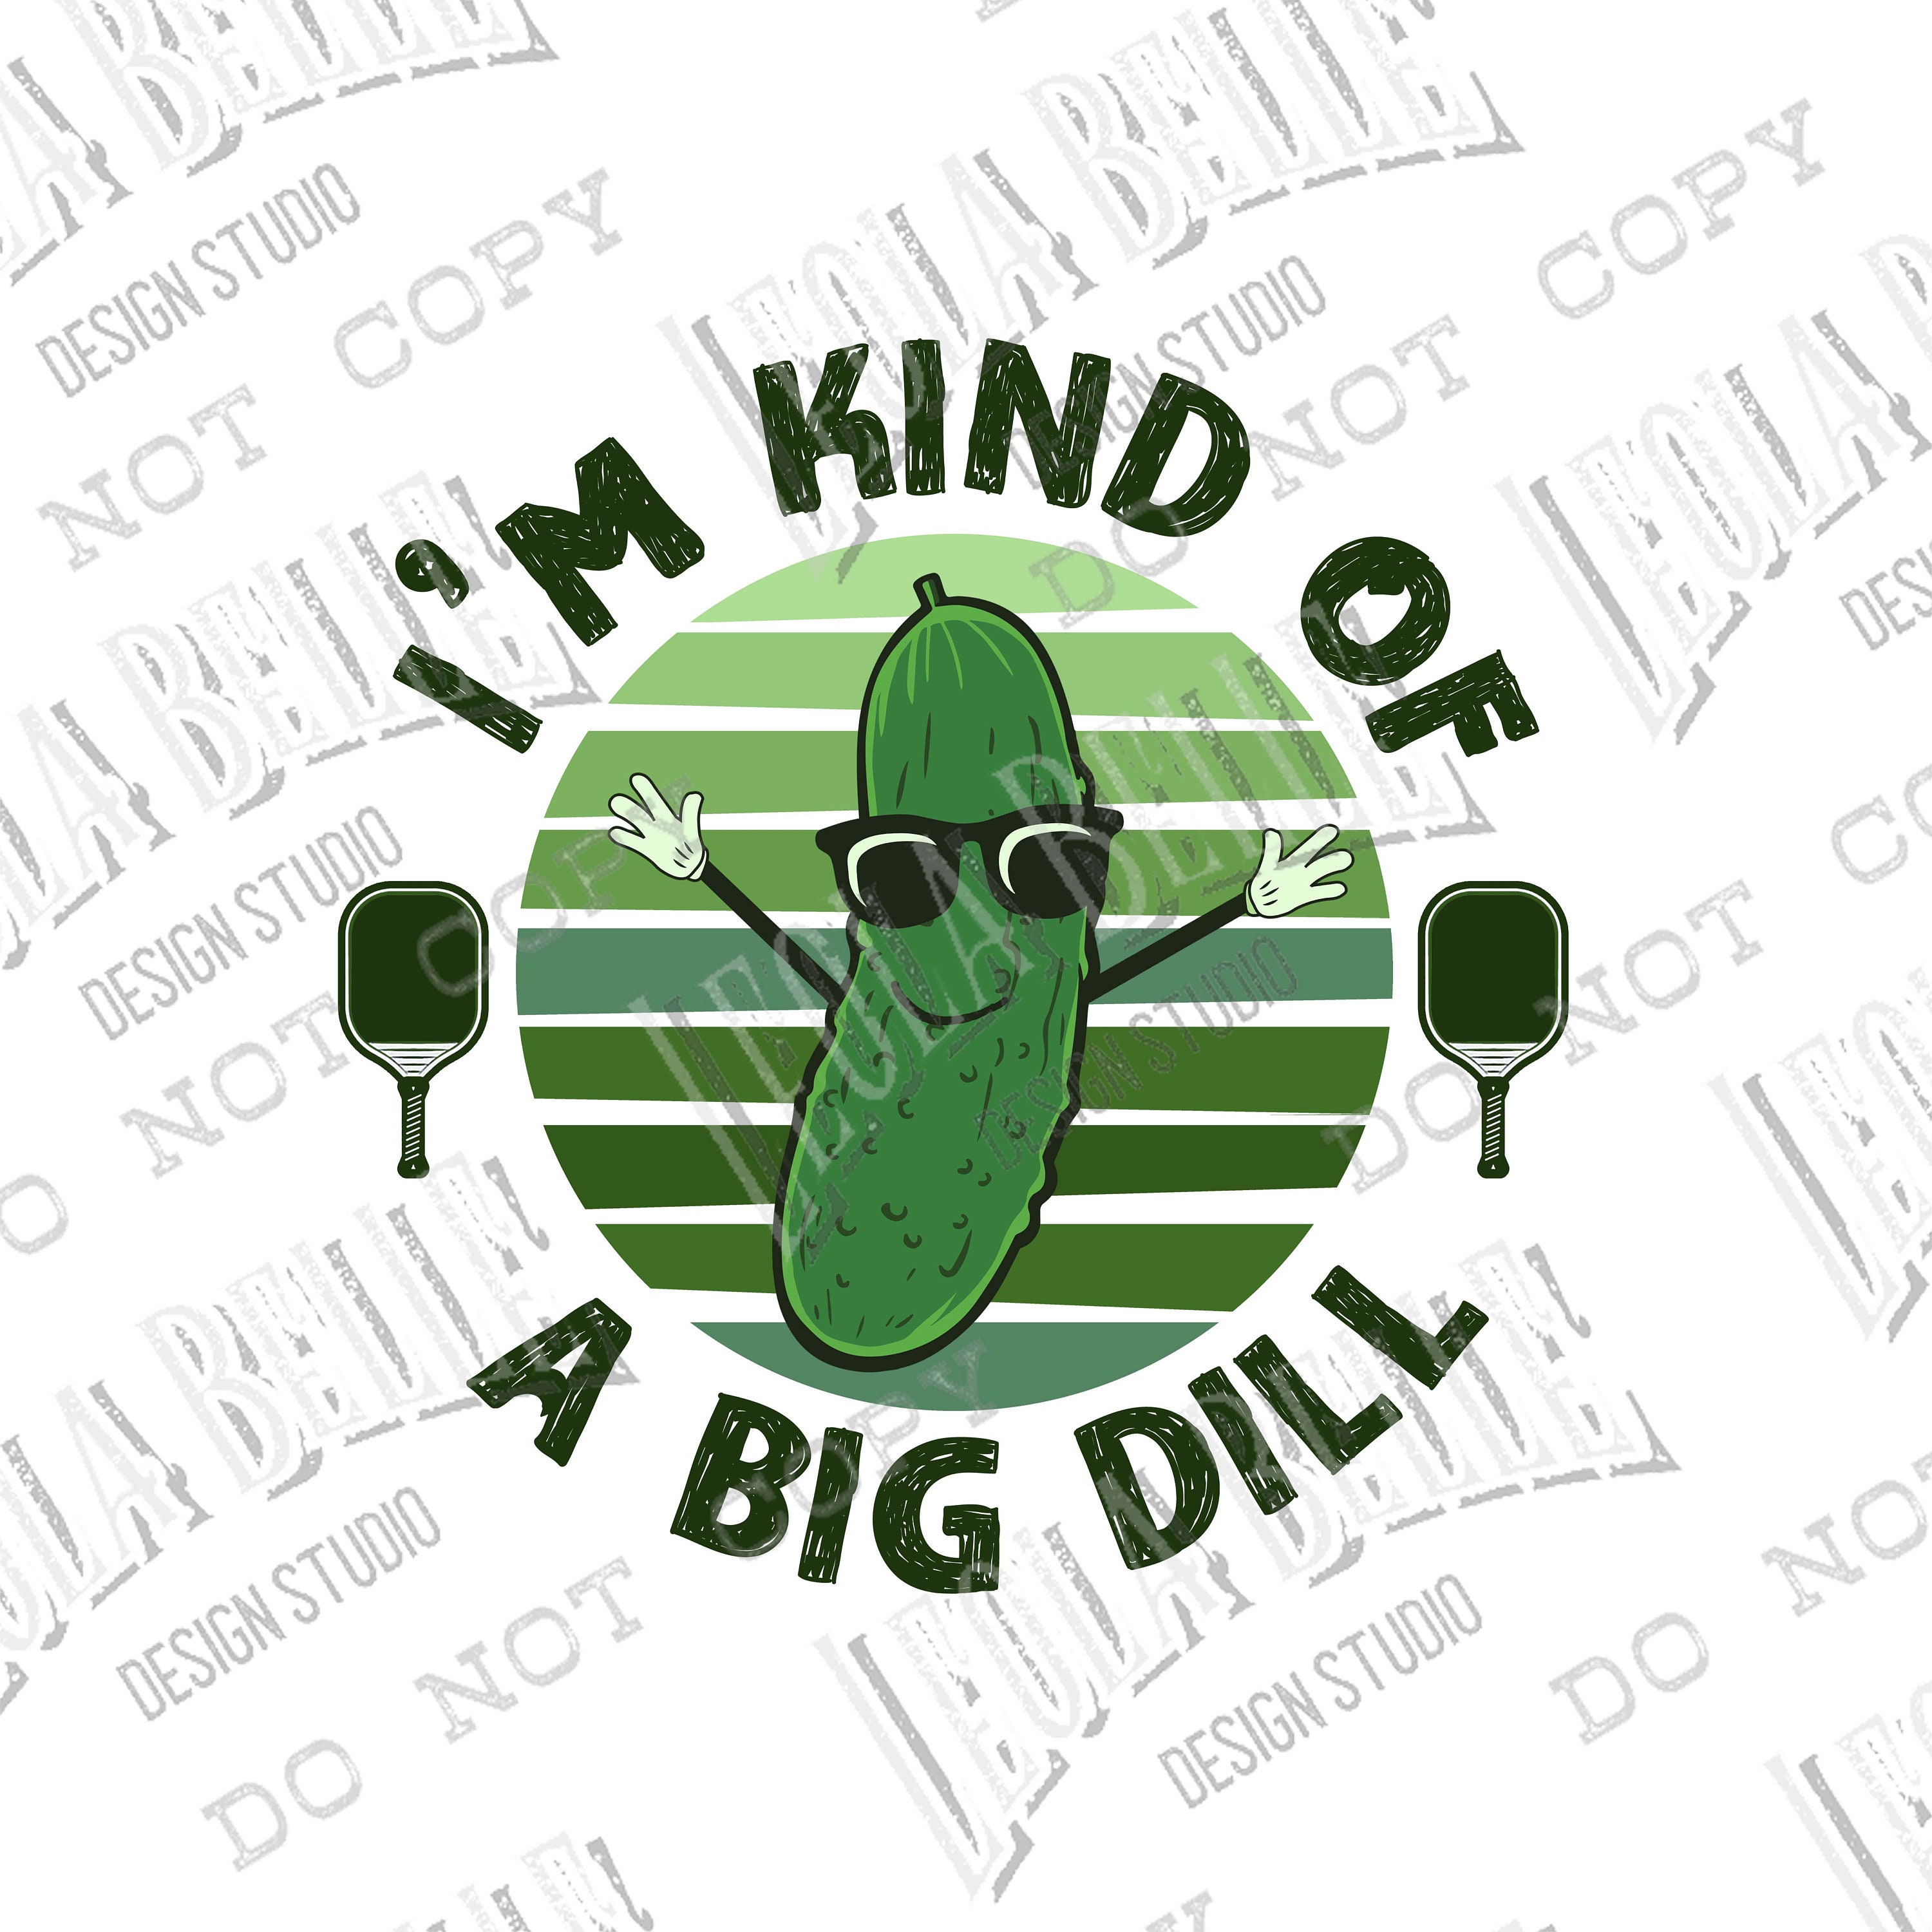 You're Kind of a Big Dill - Made in Virginia Store